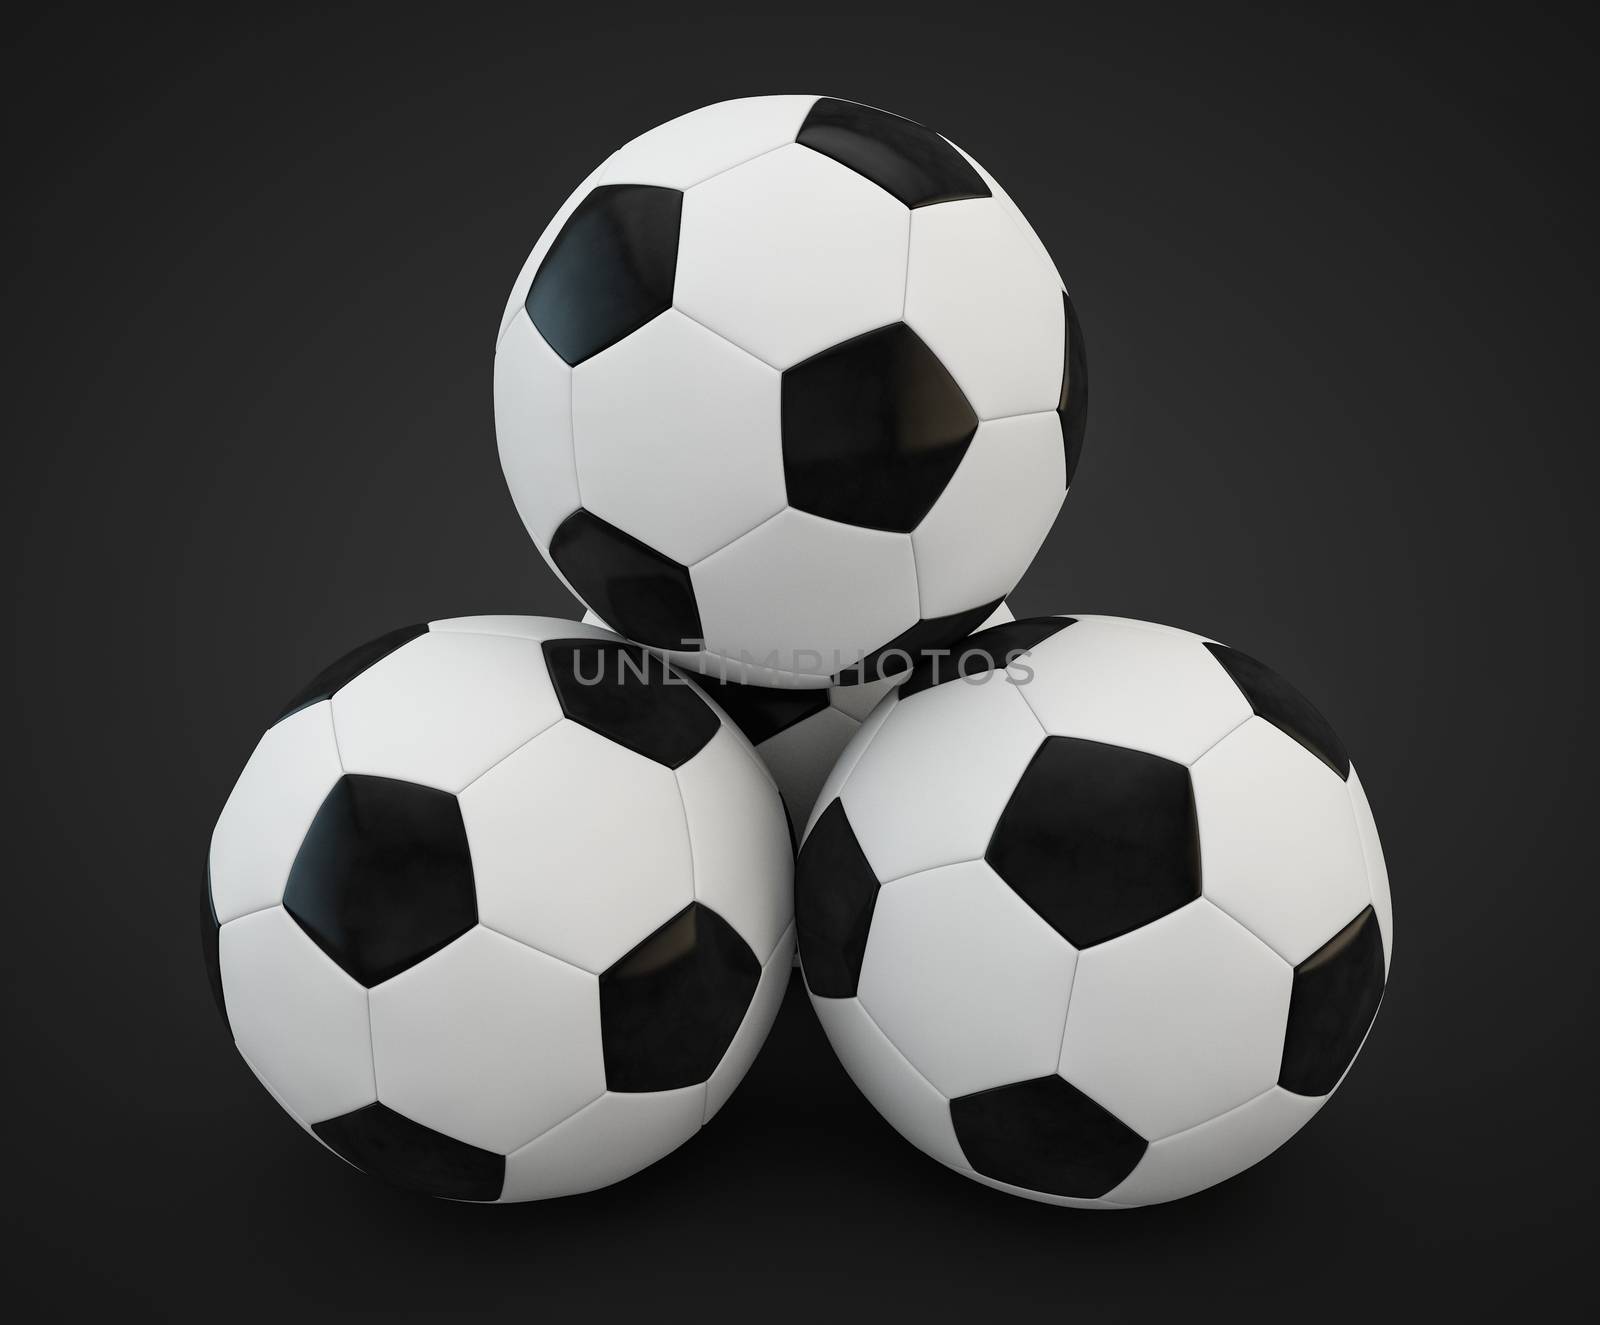 3d render of four soccer balls faced pyramid on dark background